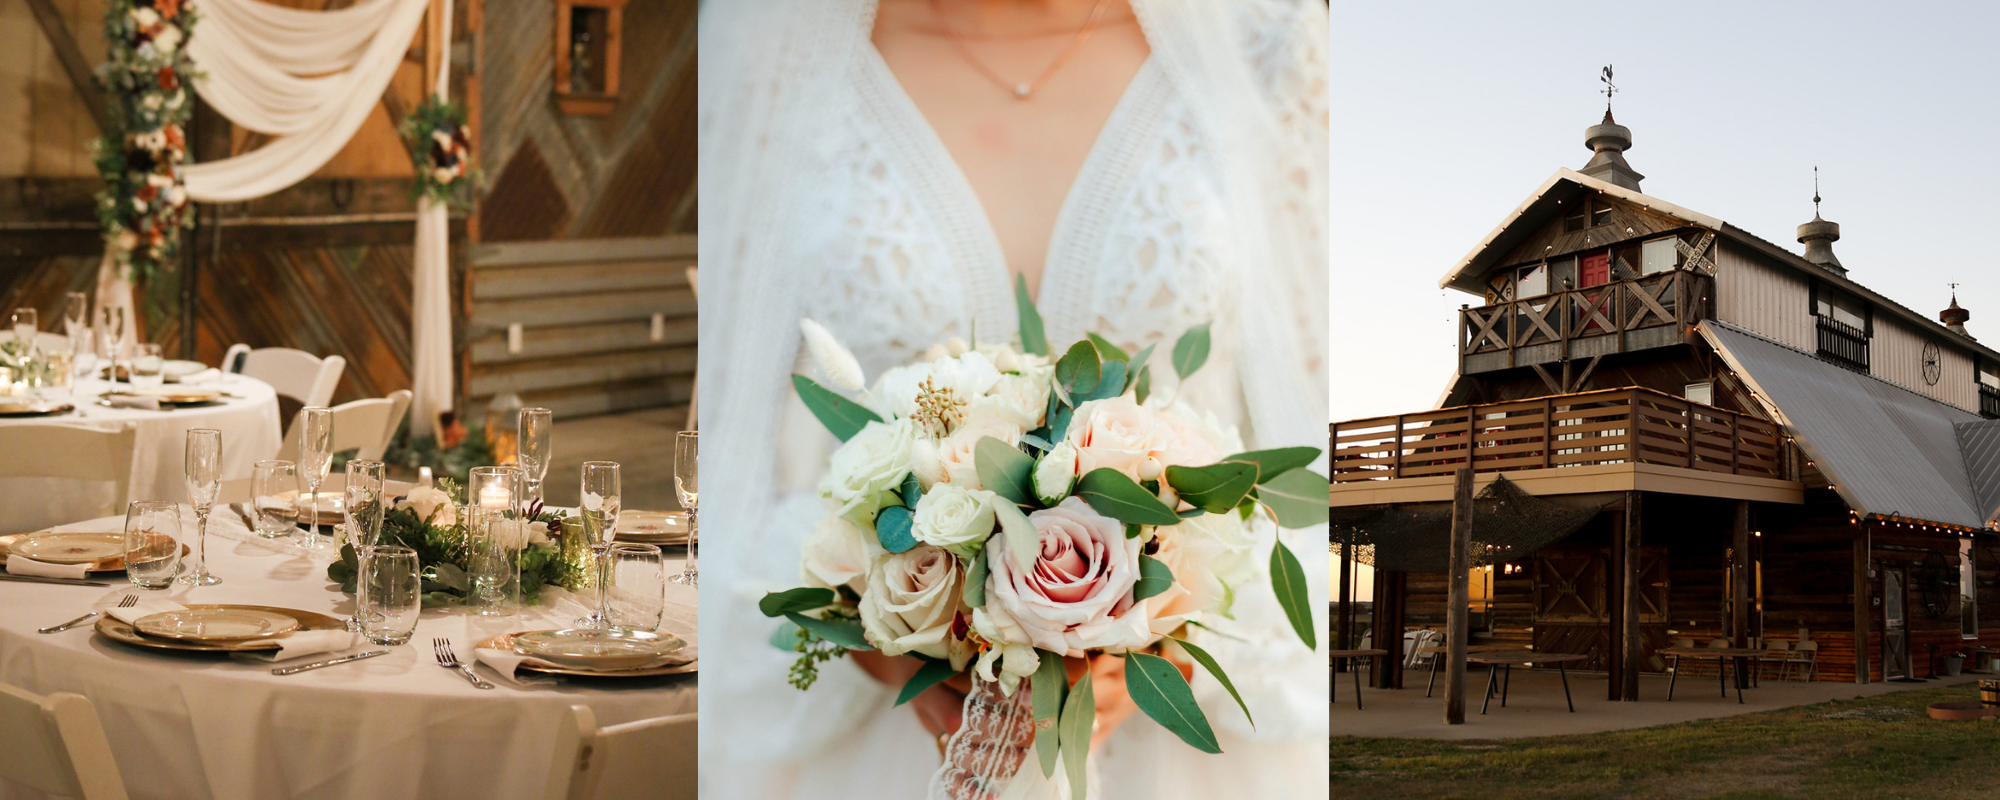 wedding table display, bride holding a bouquet and the exterior of a rustic barn 